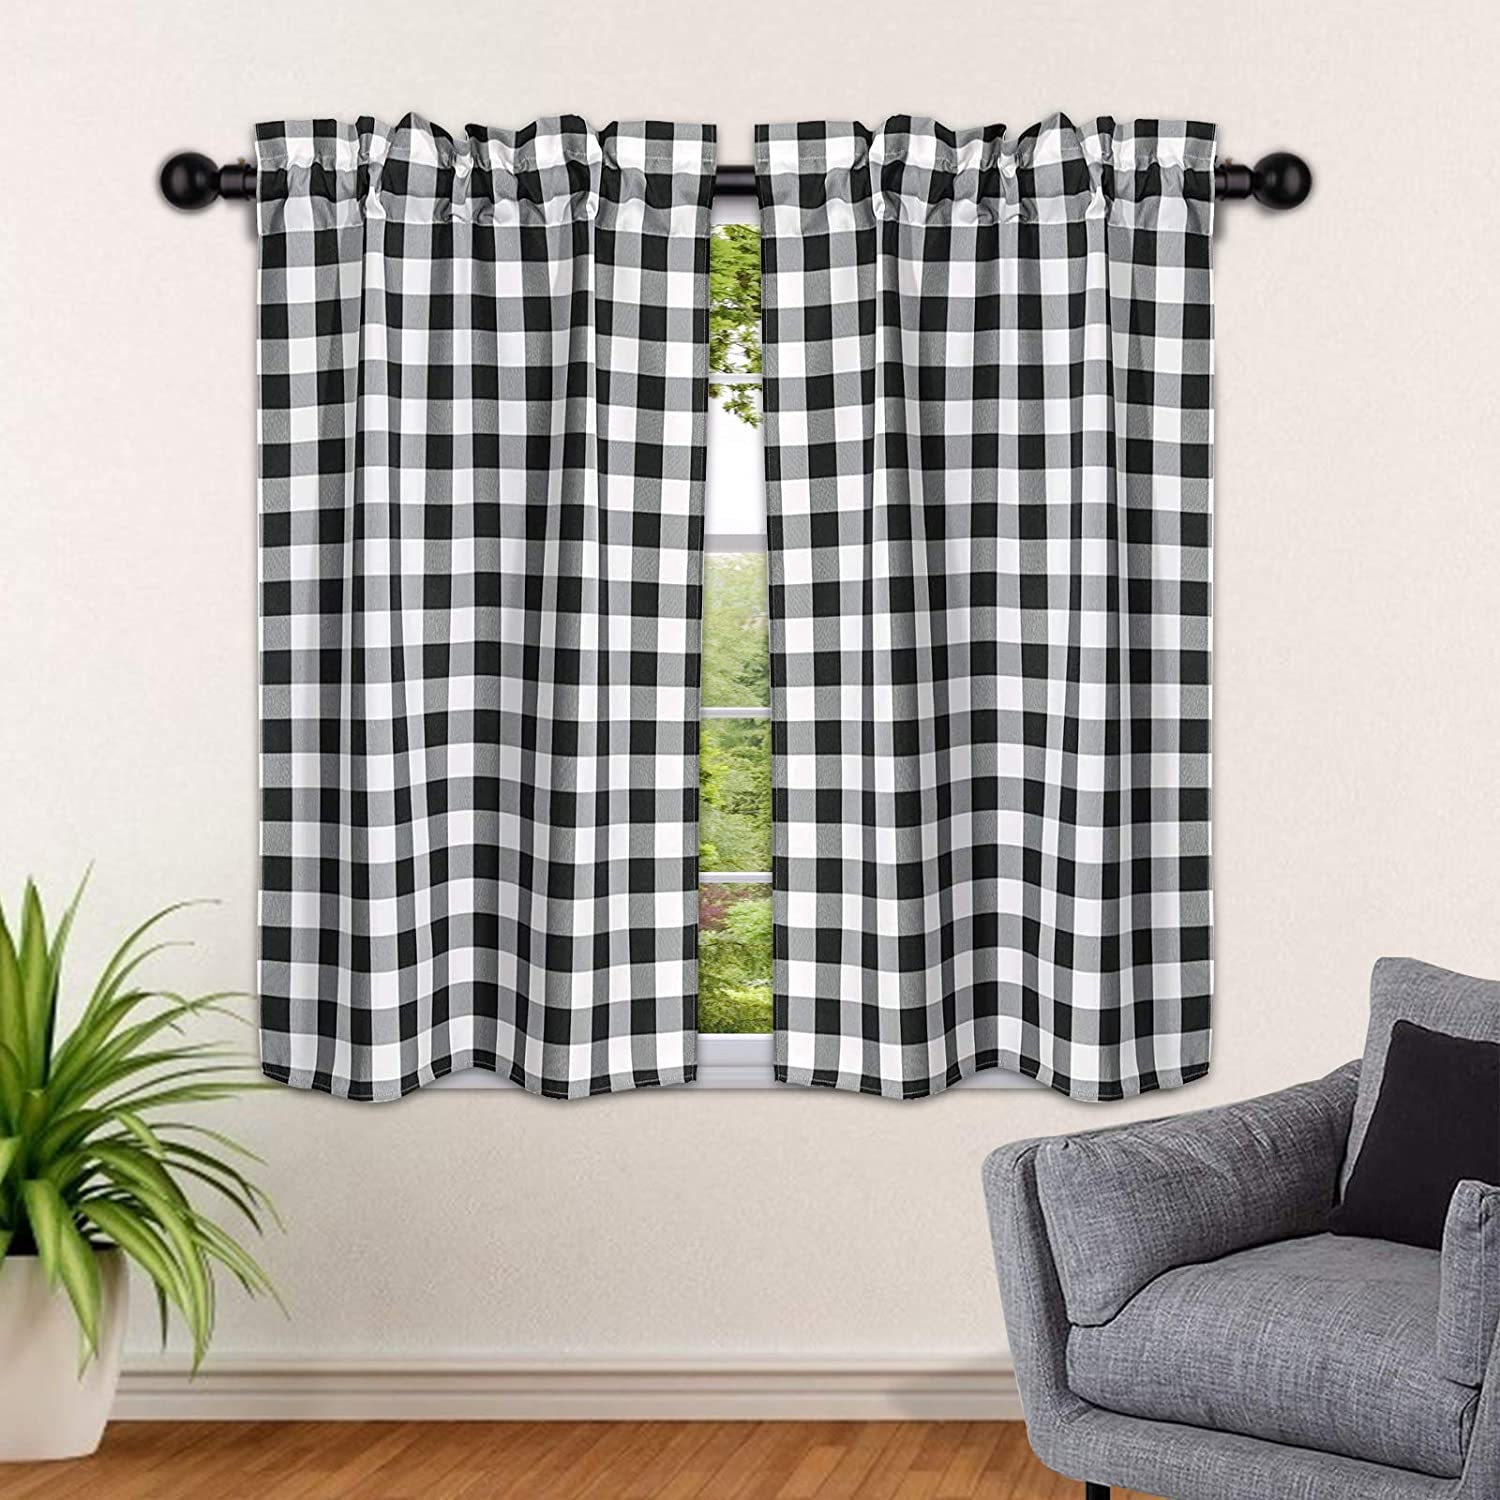 Farmhouse Kitchen Curtains Buffalo Plaid - Tiers Curtains for Windows Light Filtering Rod Pocket Thermal Insulated or Home Bedroom Cafe Decor Window Treatments, 27” W x 36” H-2 Pcs, Black